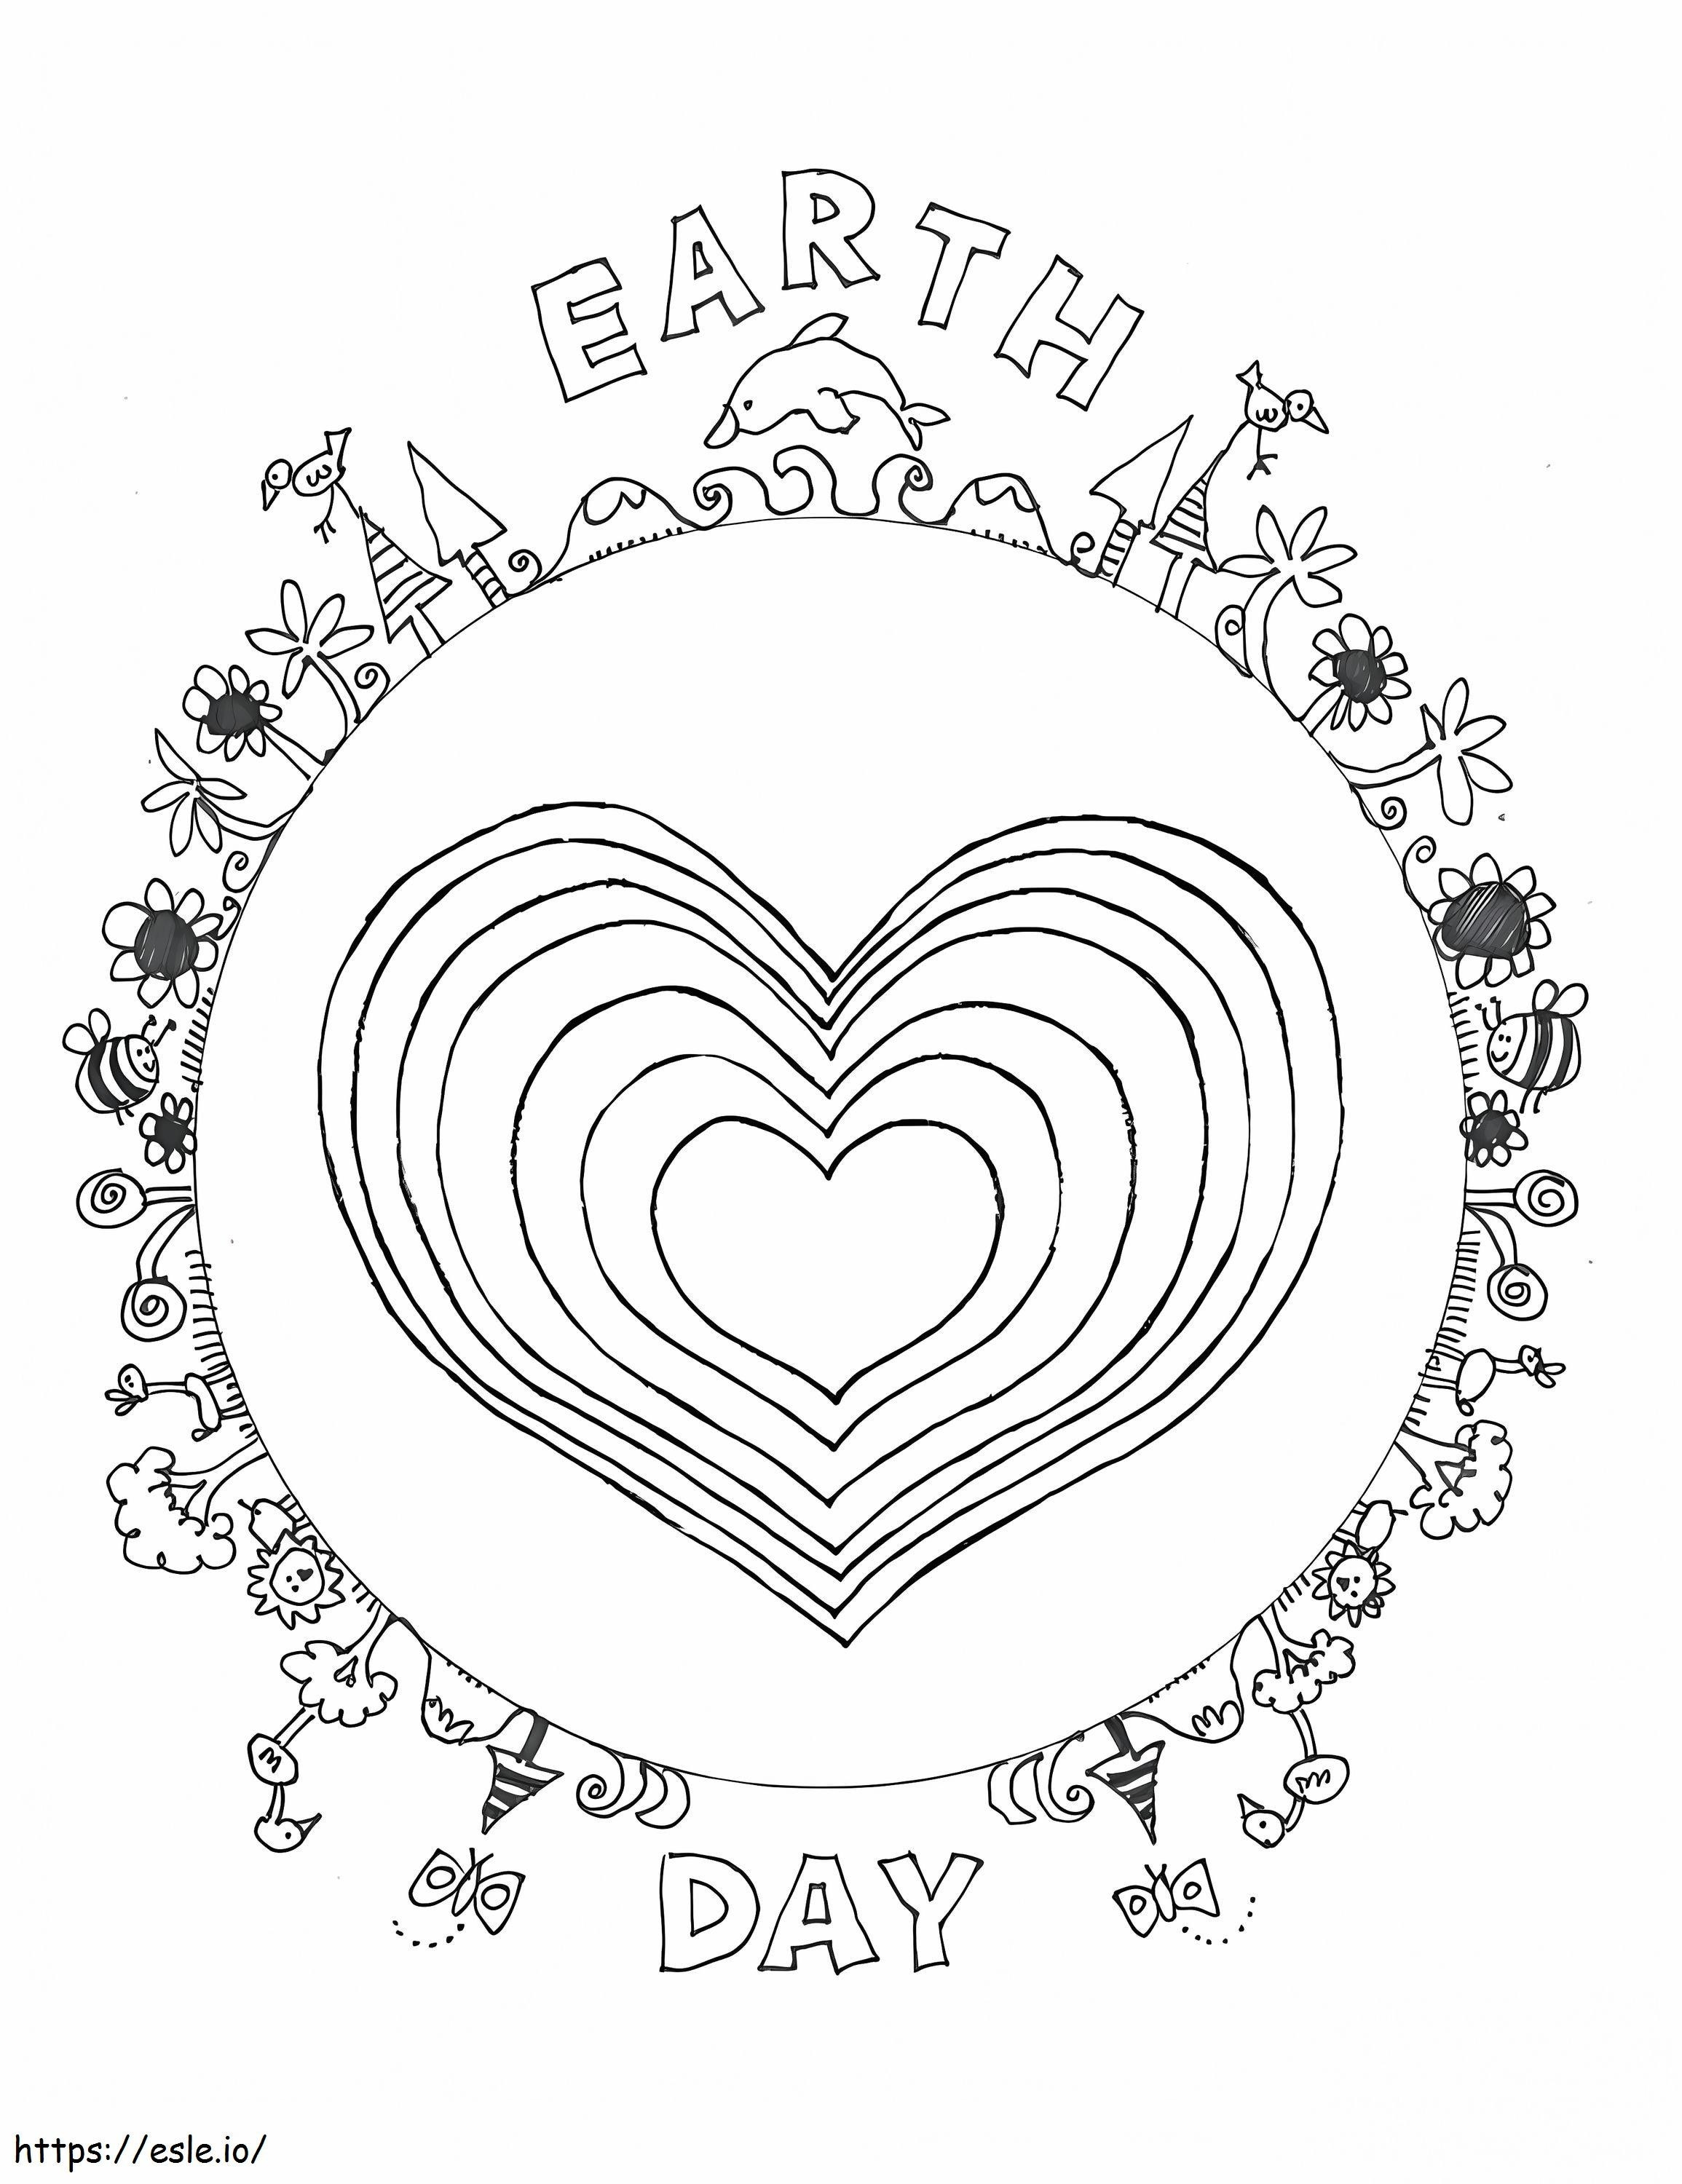 Earth Day 1 coloring page